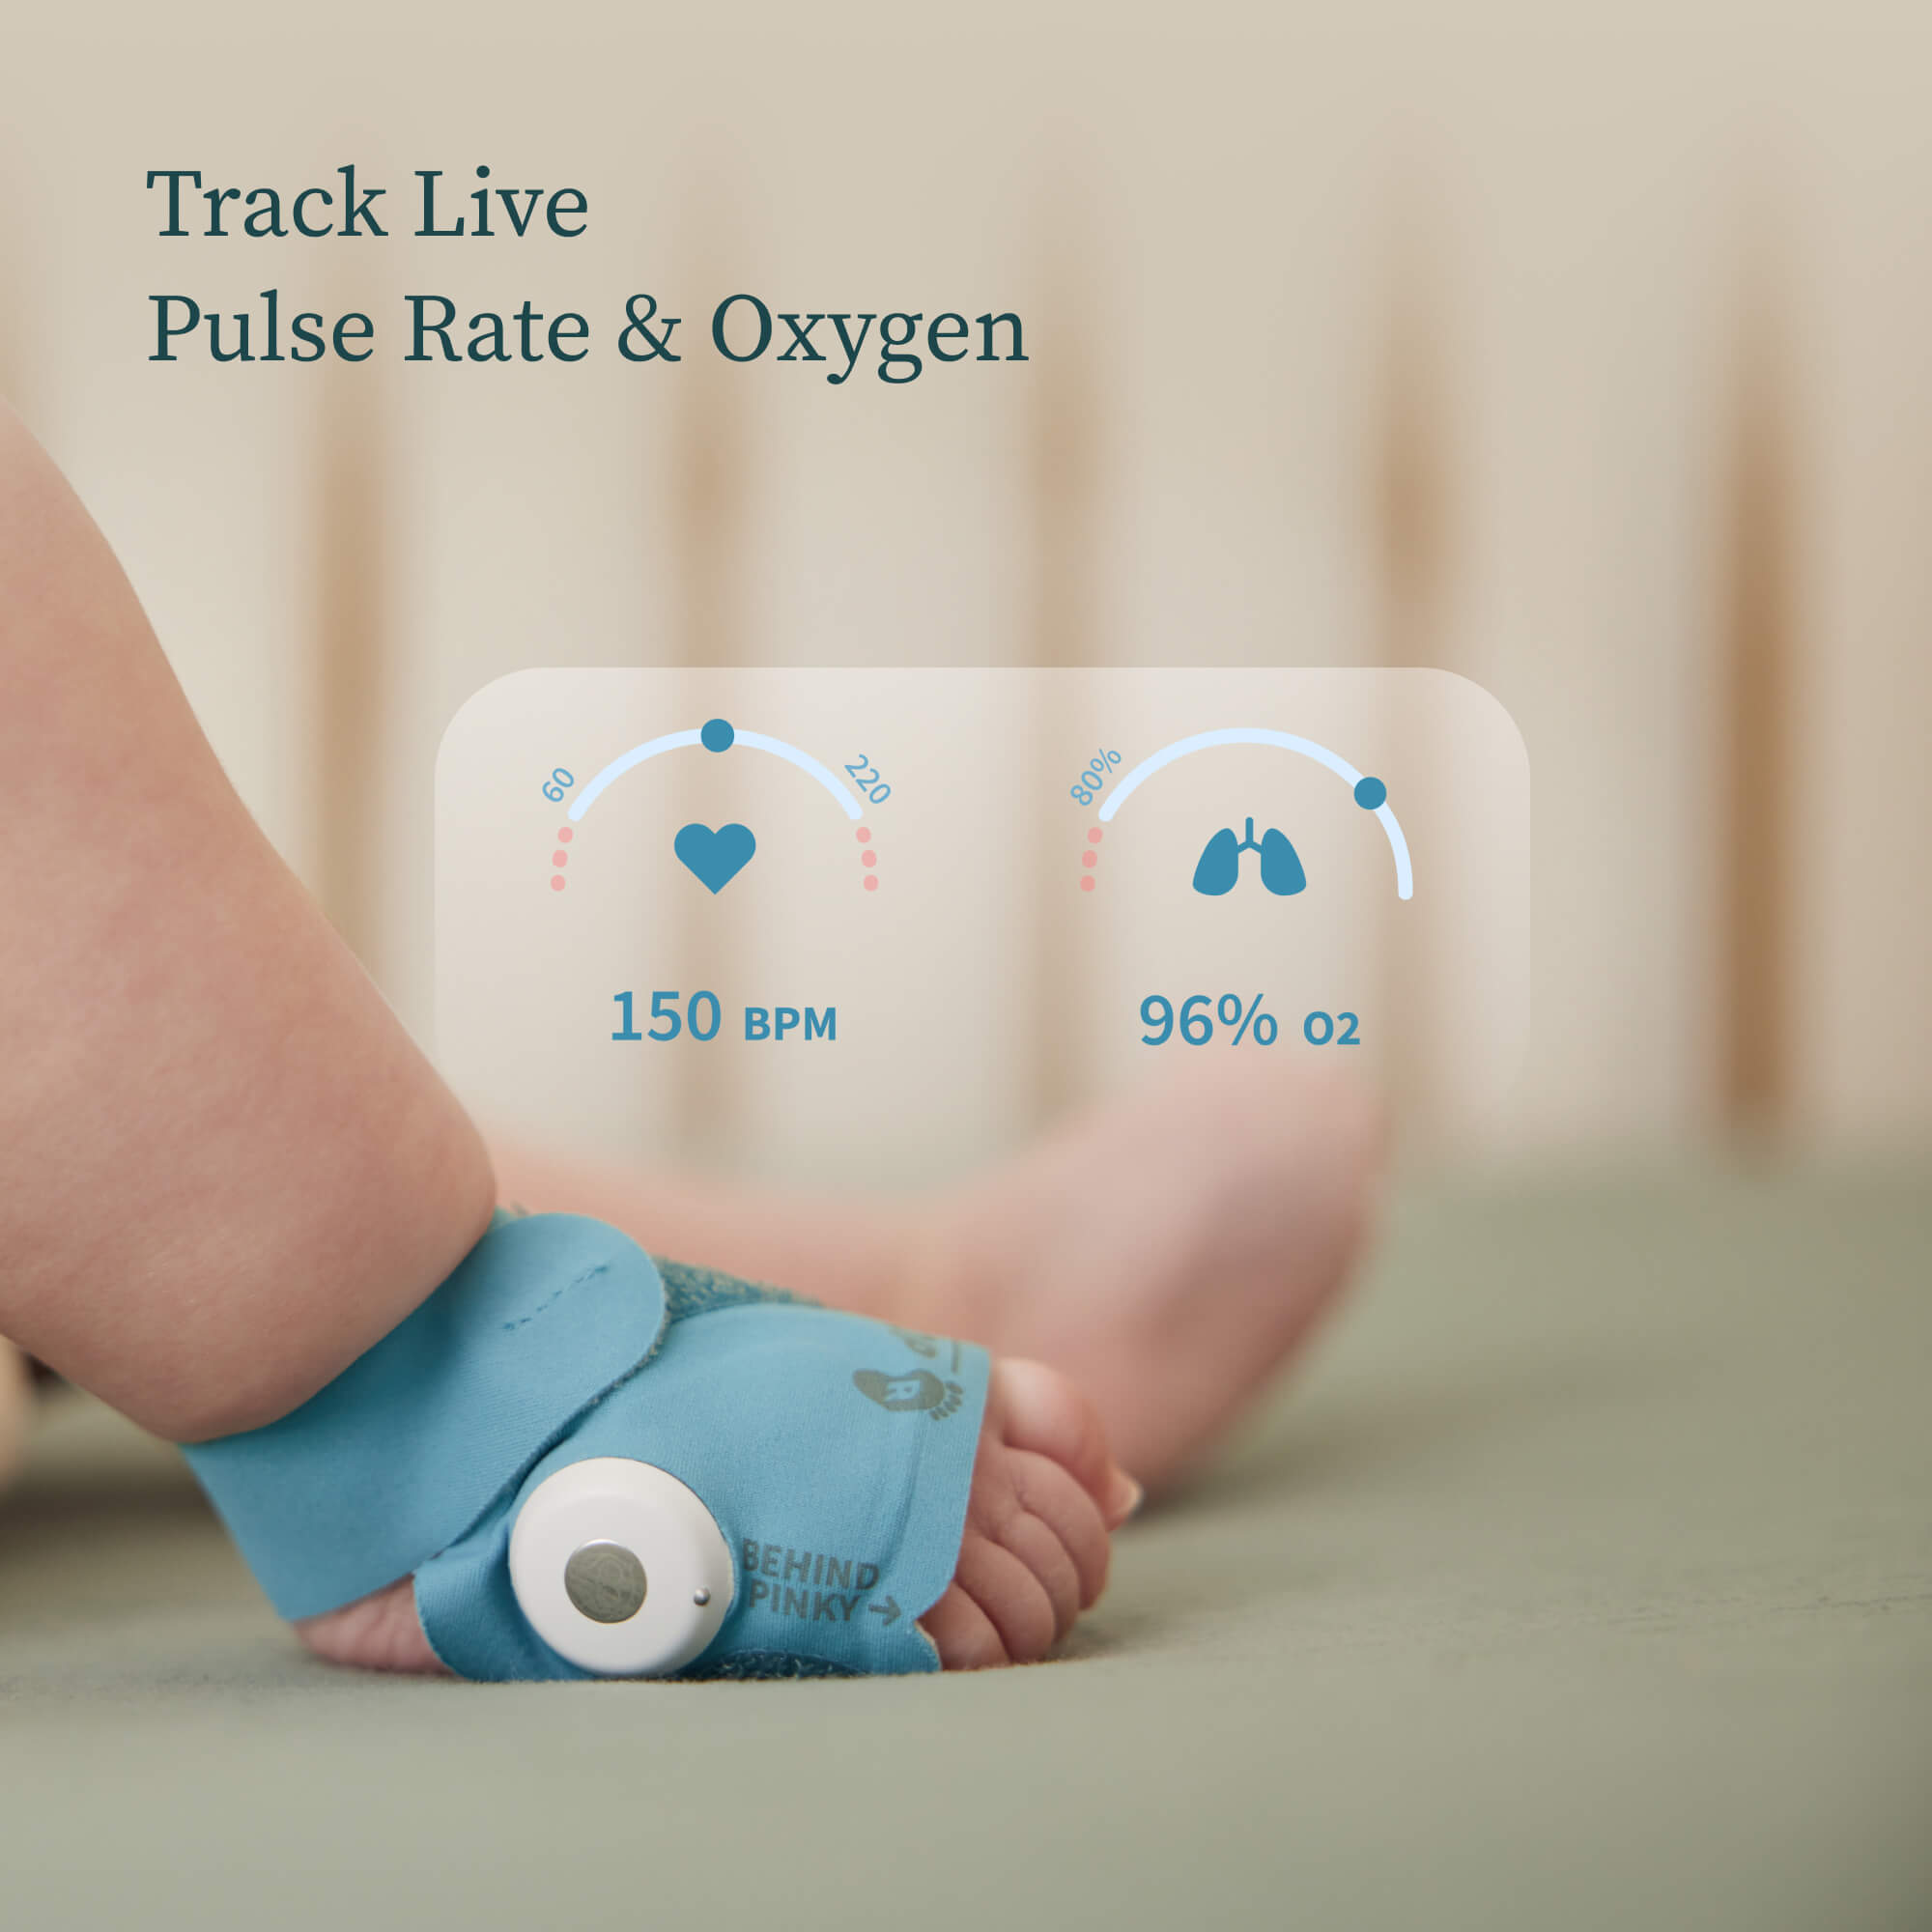 Track live pulse rate & oxygen